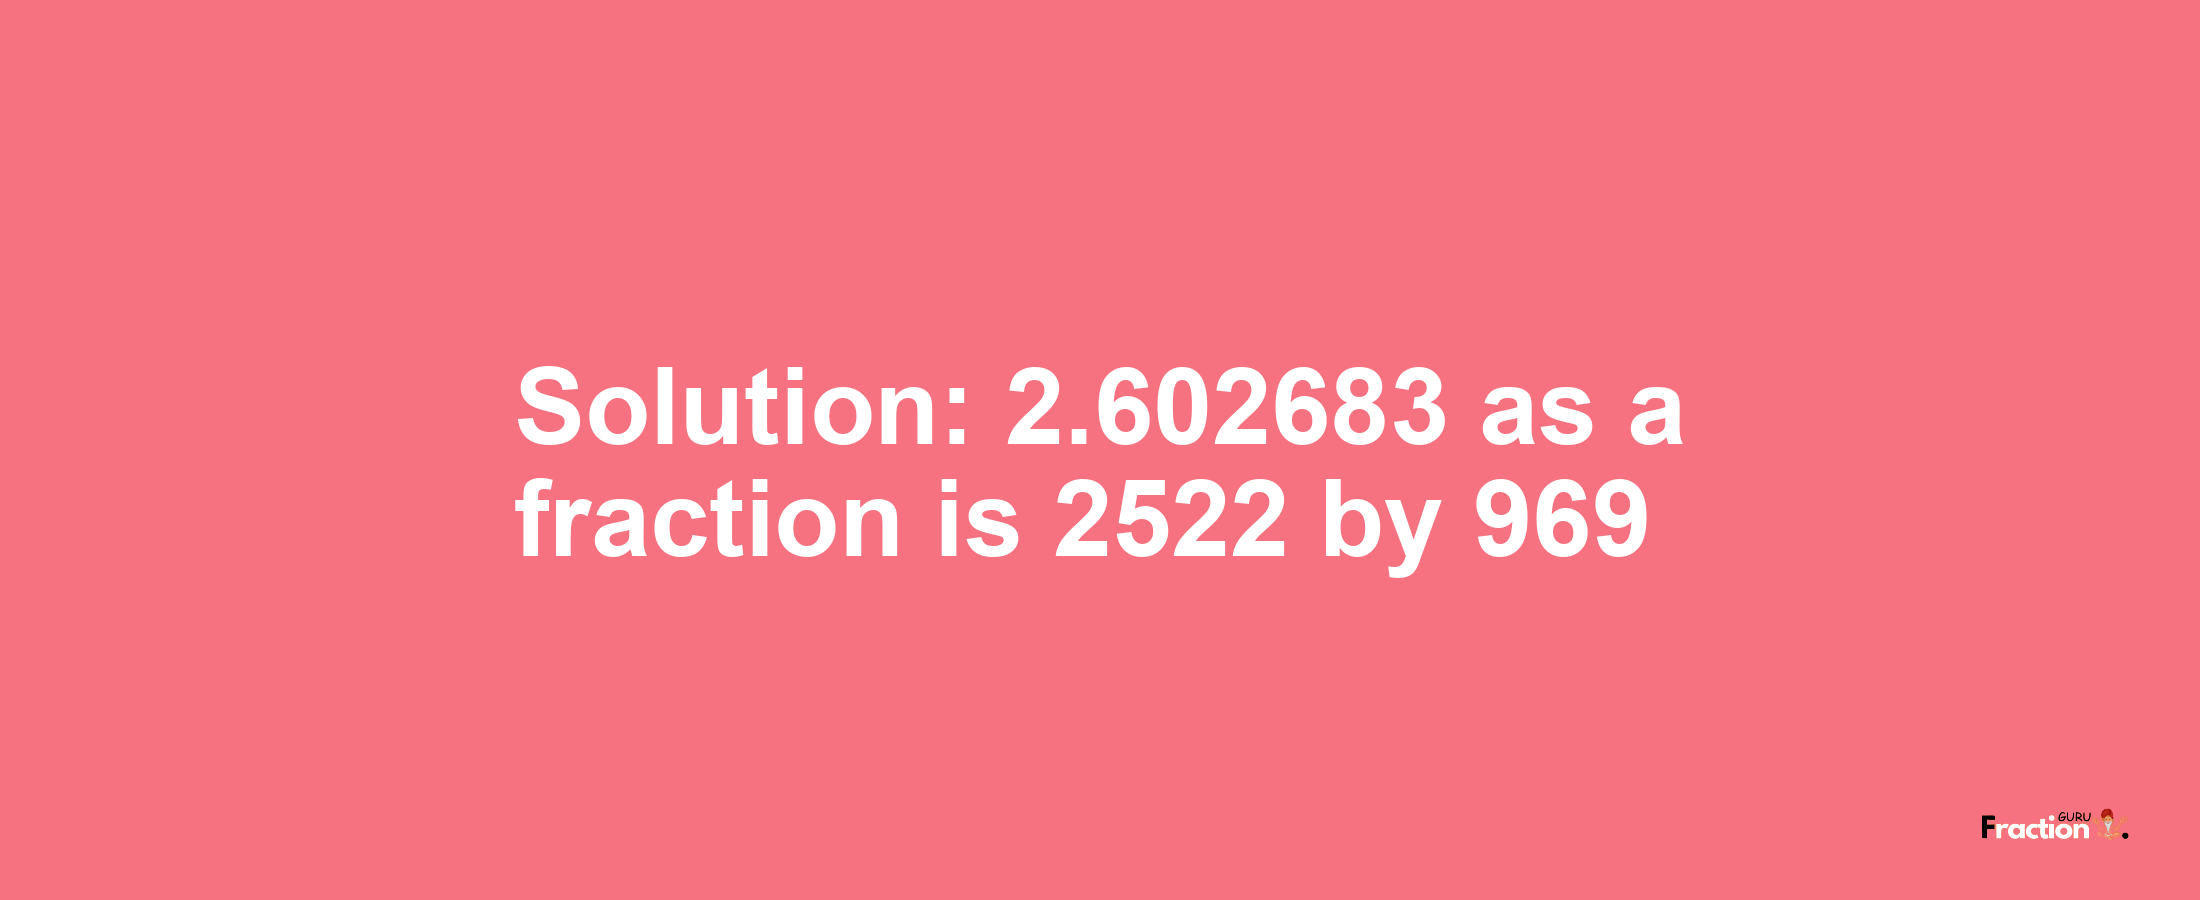 Solution:2.602683 as a fraction is 2522/969